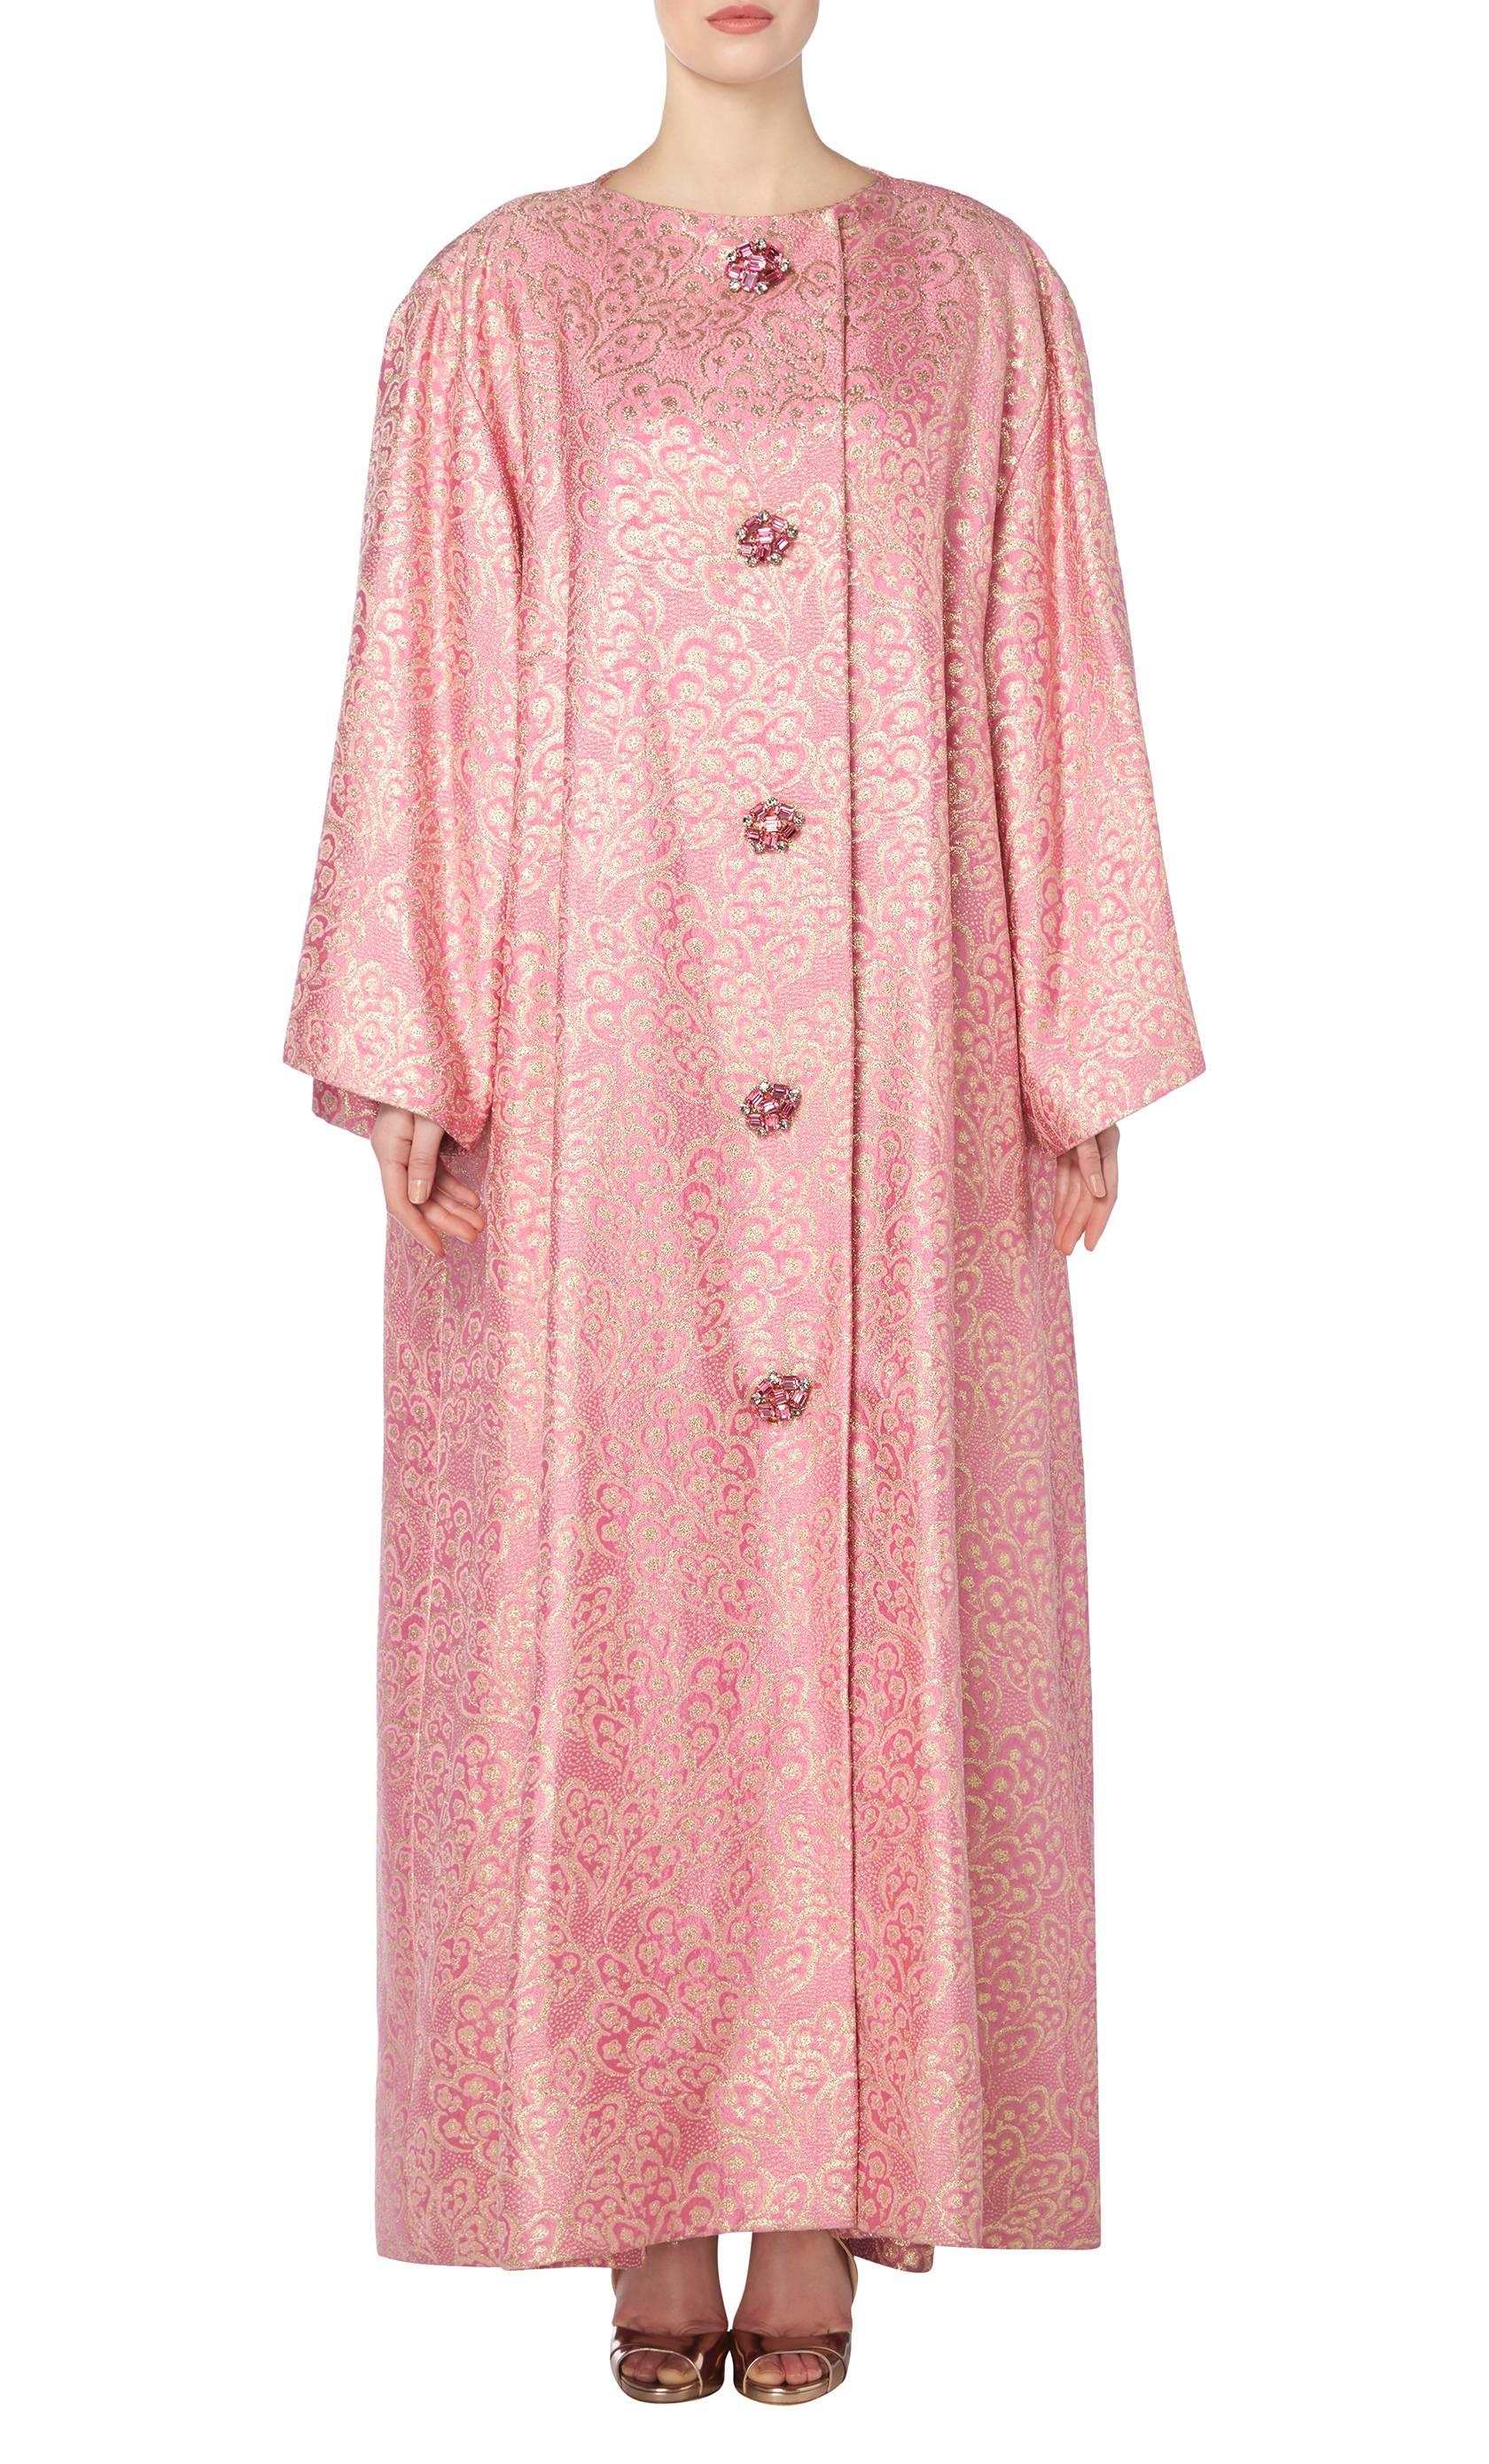 This dramatic and opulent Nina Ricci haute couture evening coat is composed of a spectacular hot pink and gold lurex, with jewelled buttons and hot pink silk lining. Rare and perfect for making a real entrance!

Constructed in pink and gold